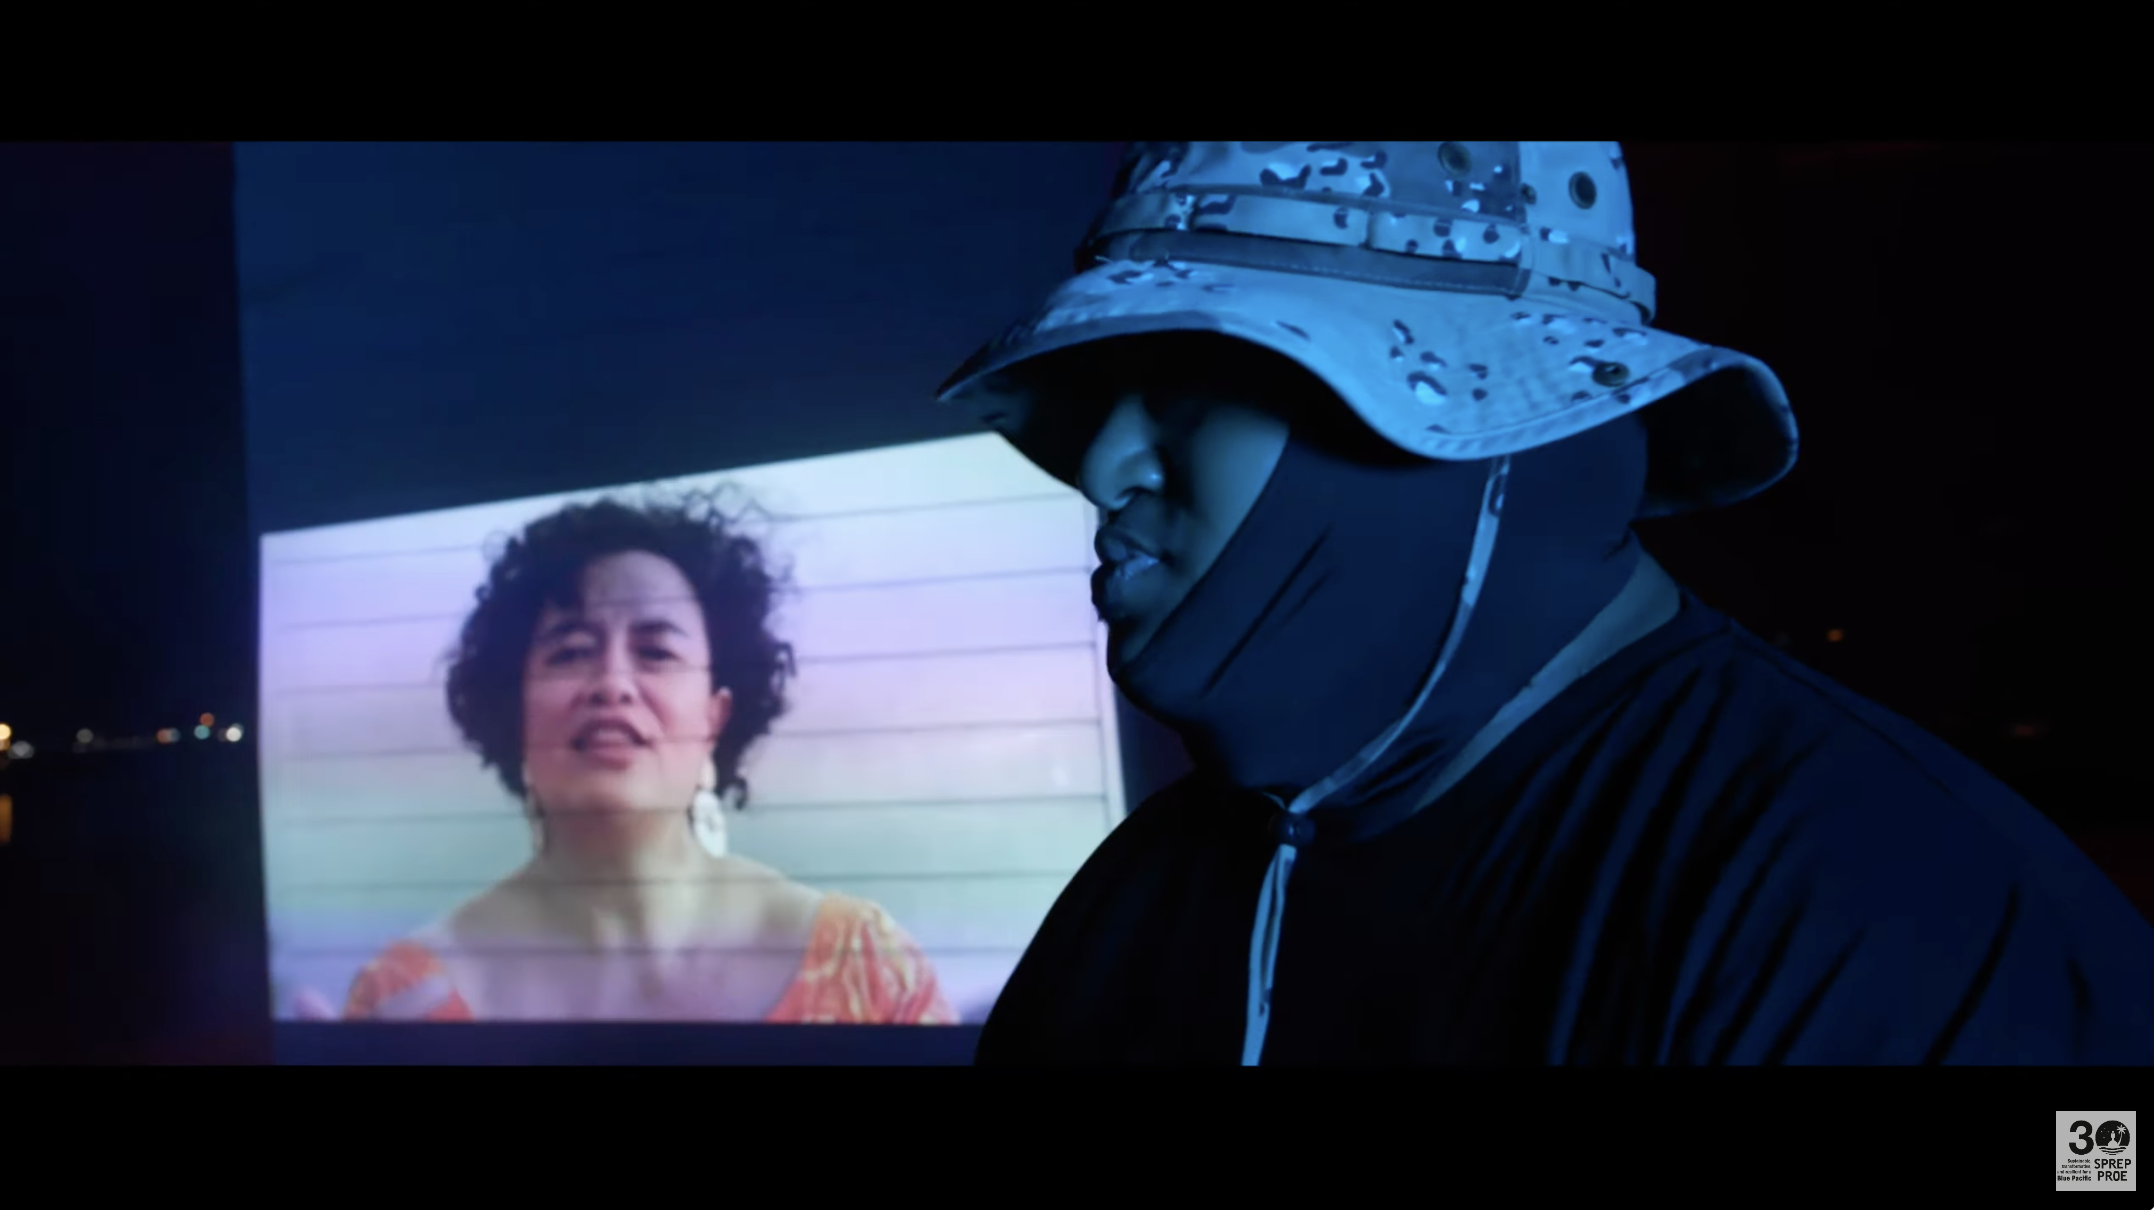 Screenshot featuring poet Audrey Brown-Pereira and hip-hop artist Anonymouz from "They taking pictures of us in the water" Pacific Regional Environment Programme (SPREP) via Youtube)